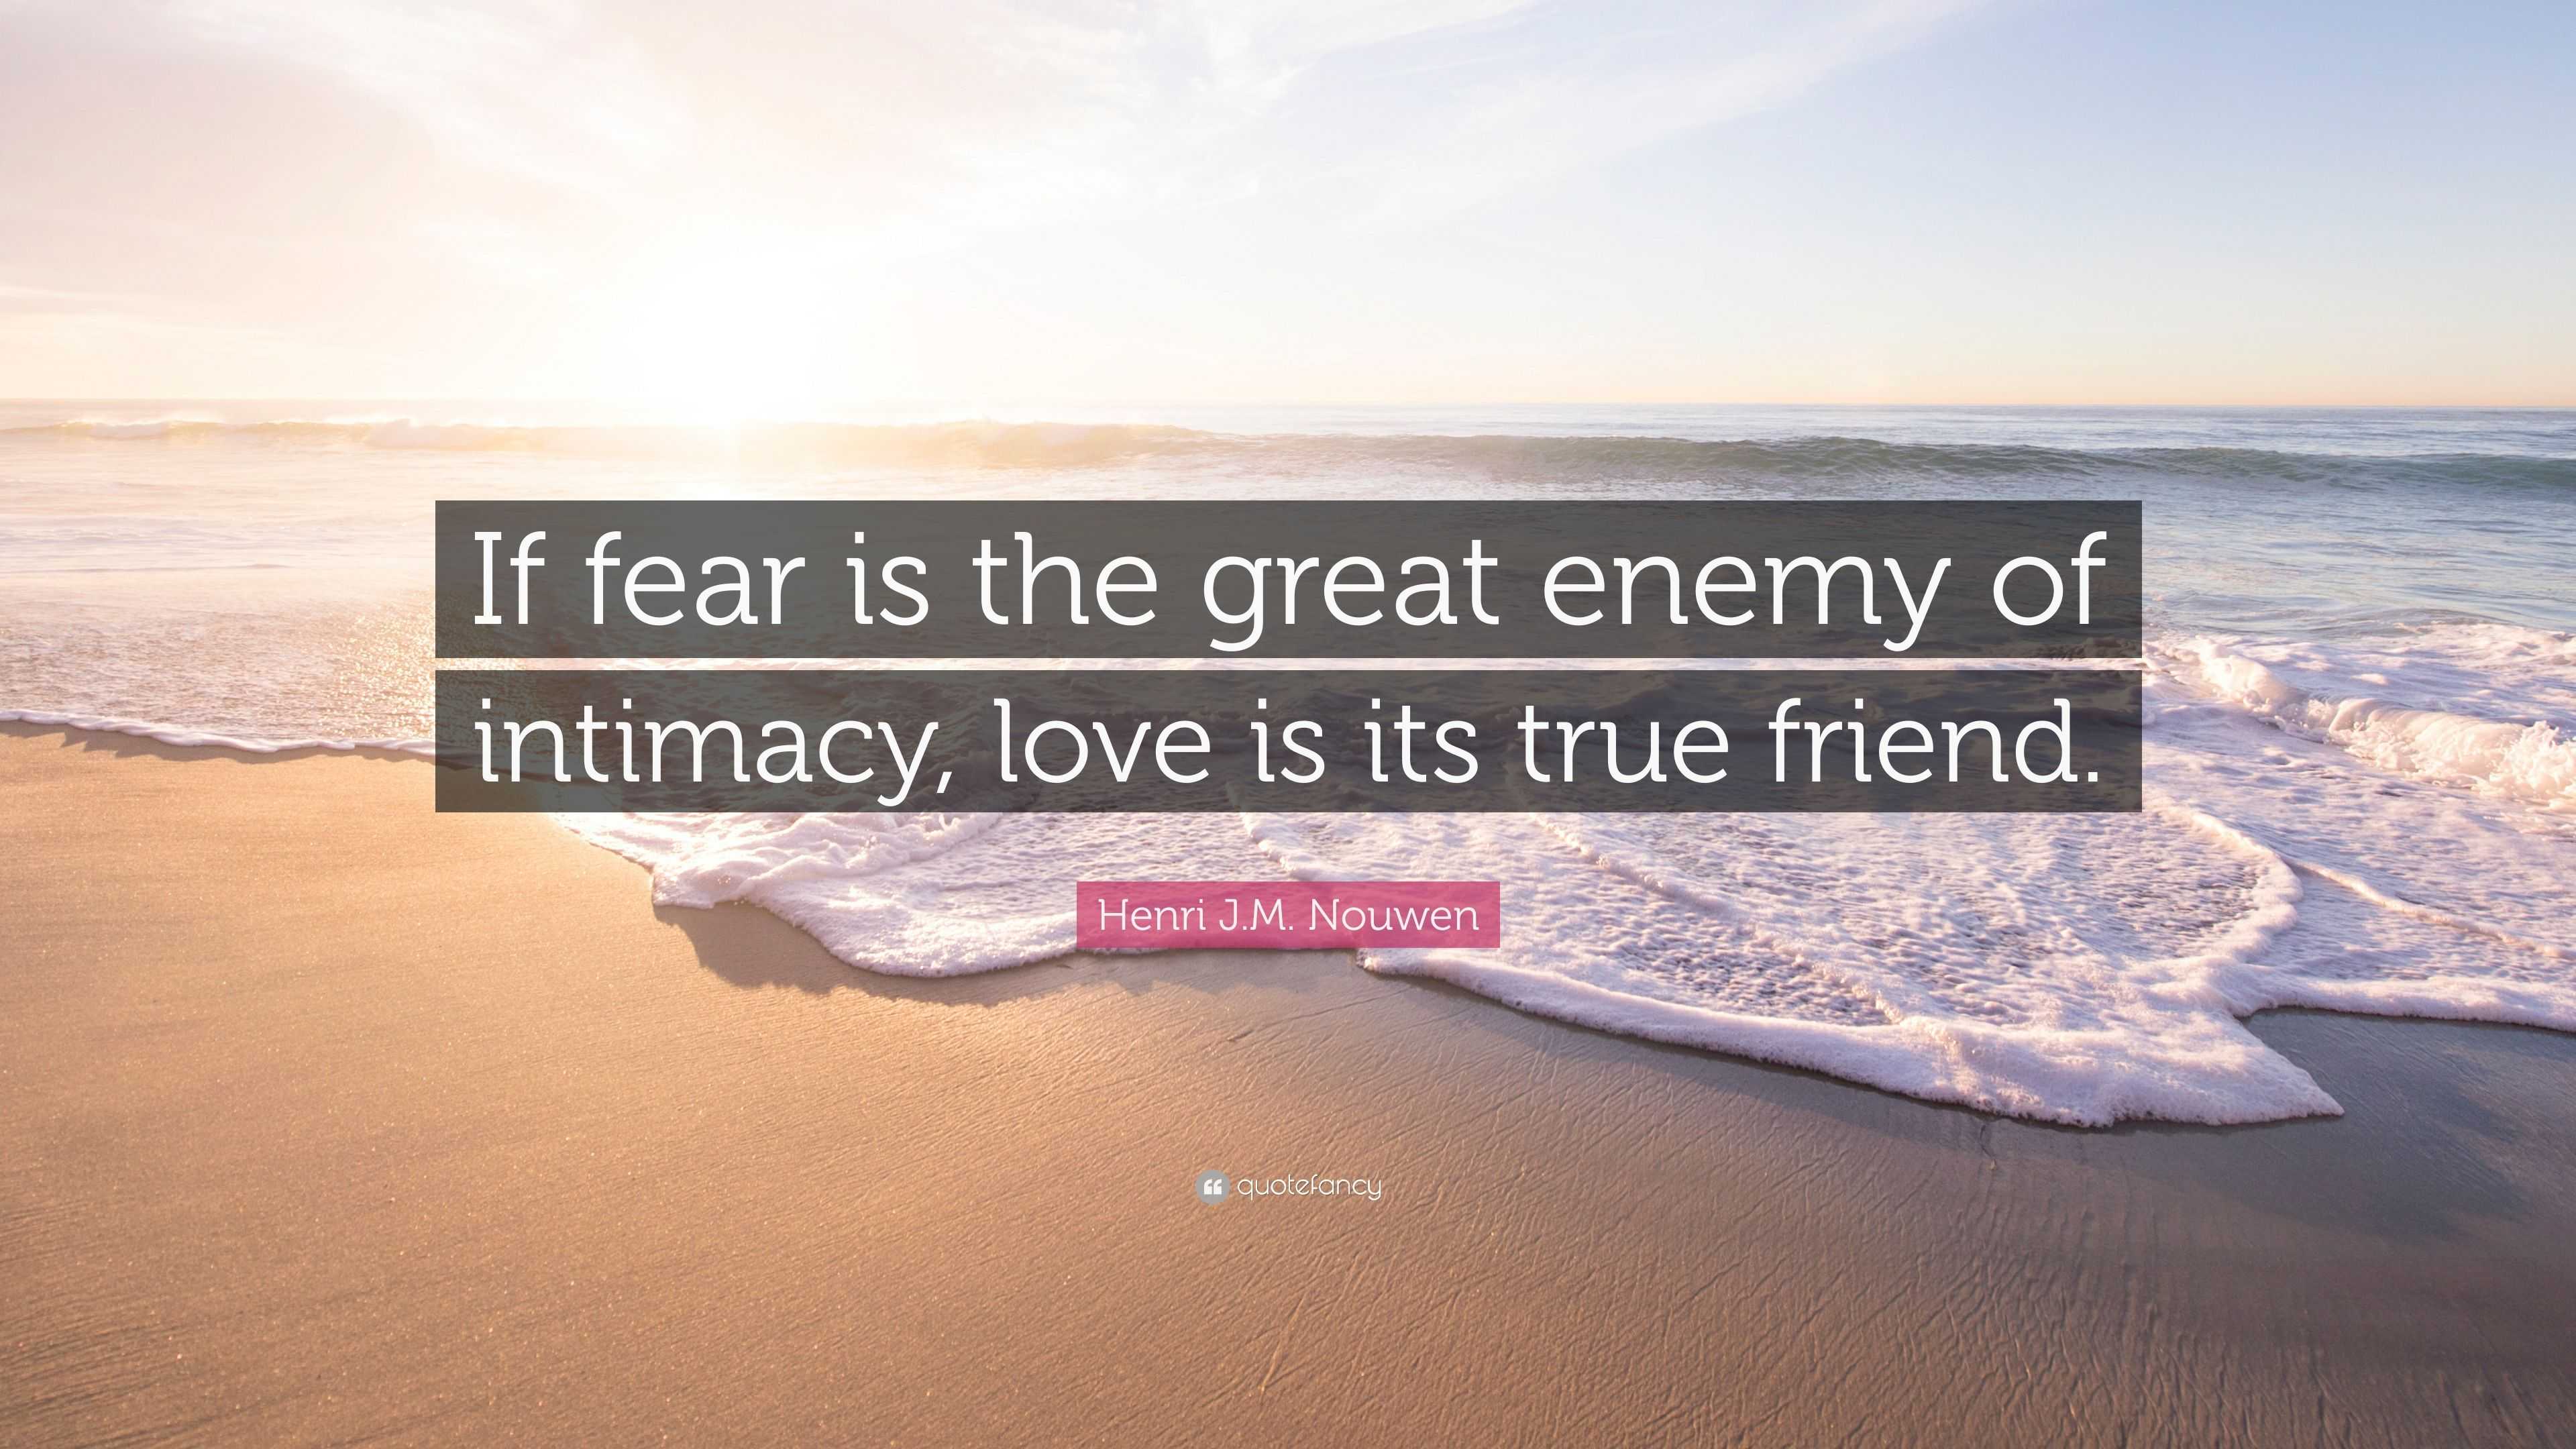 Henri J M Nouwen Quote “if Fear Is The Great Enemy Of Intimacy Love